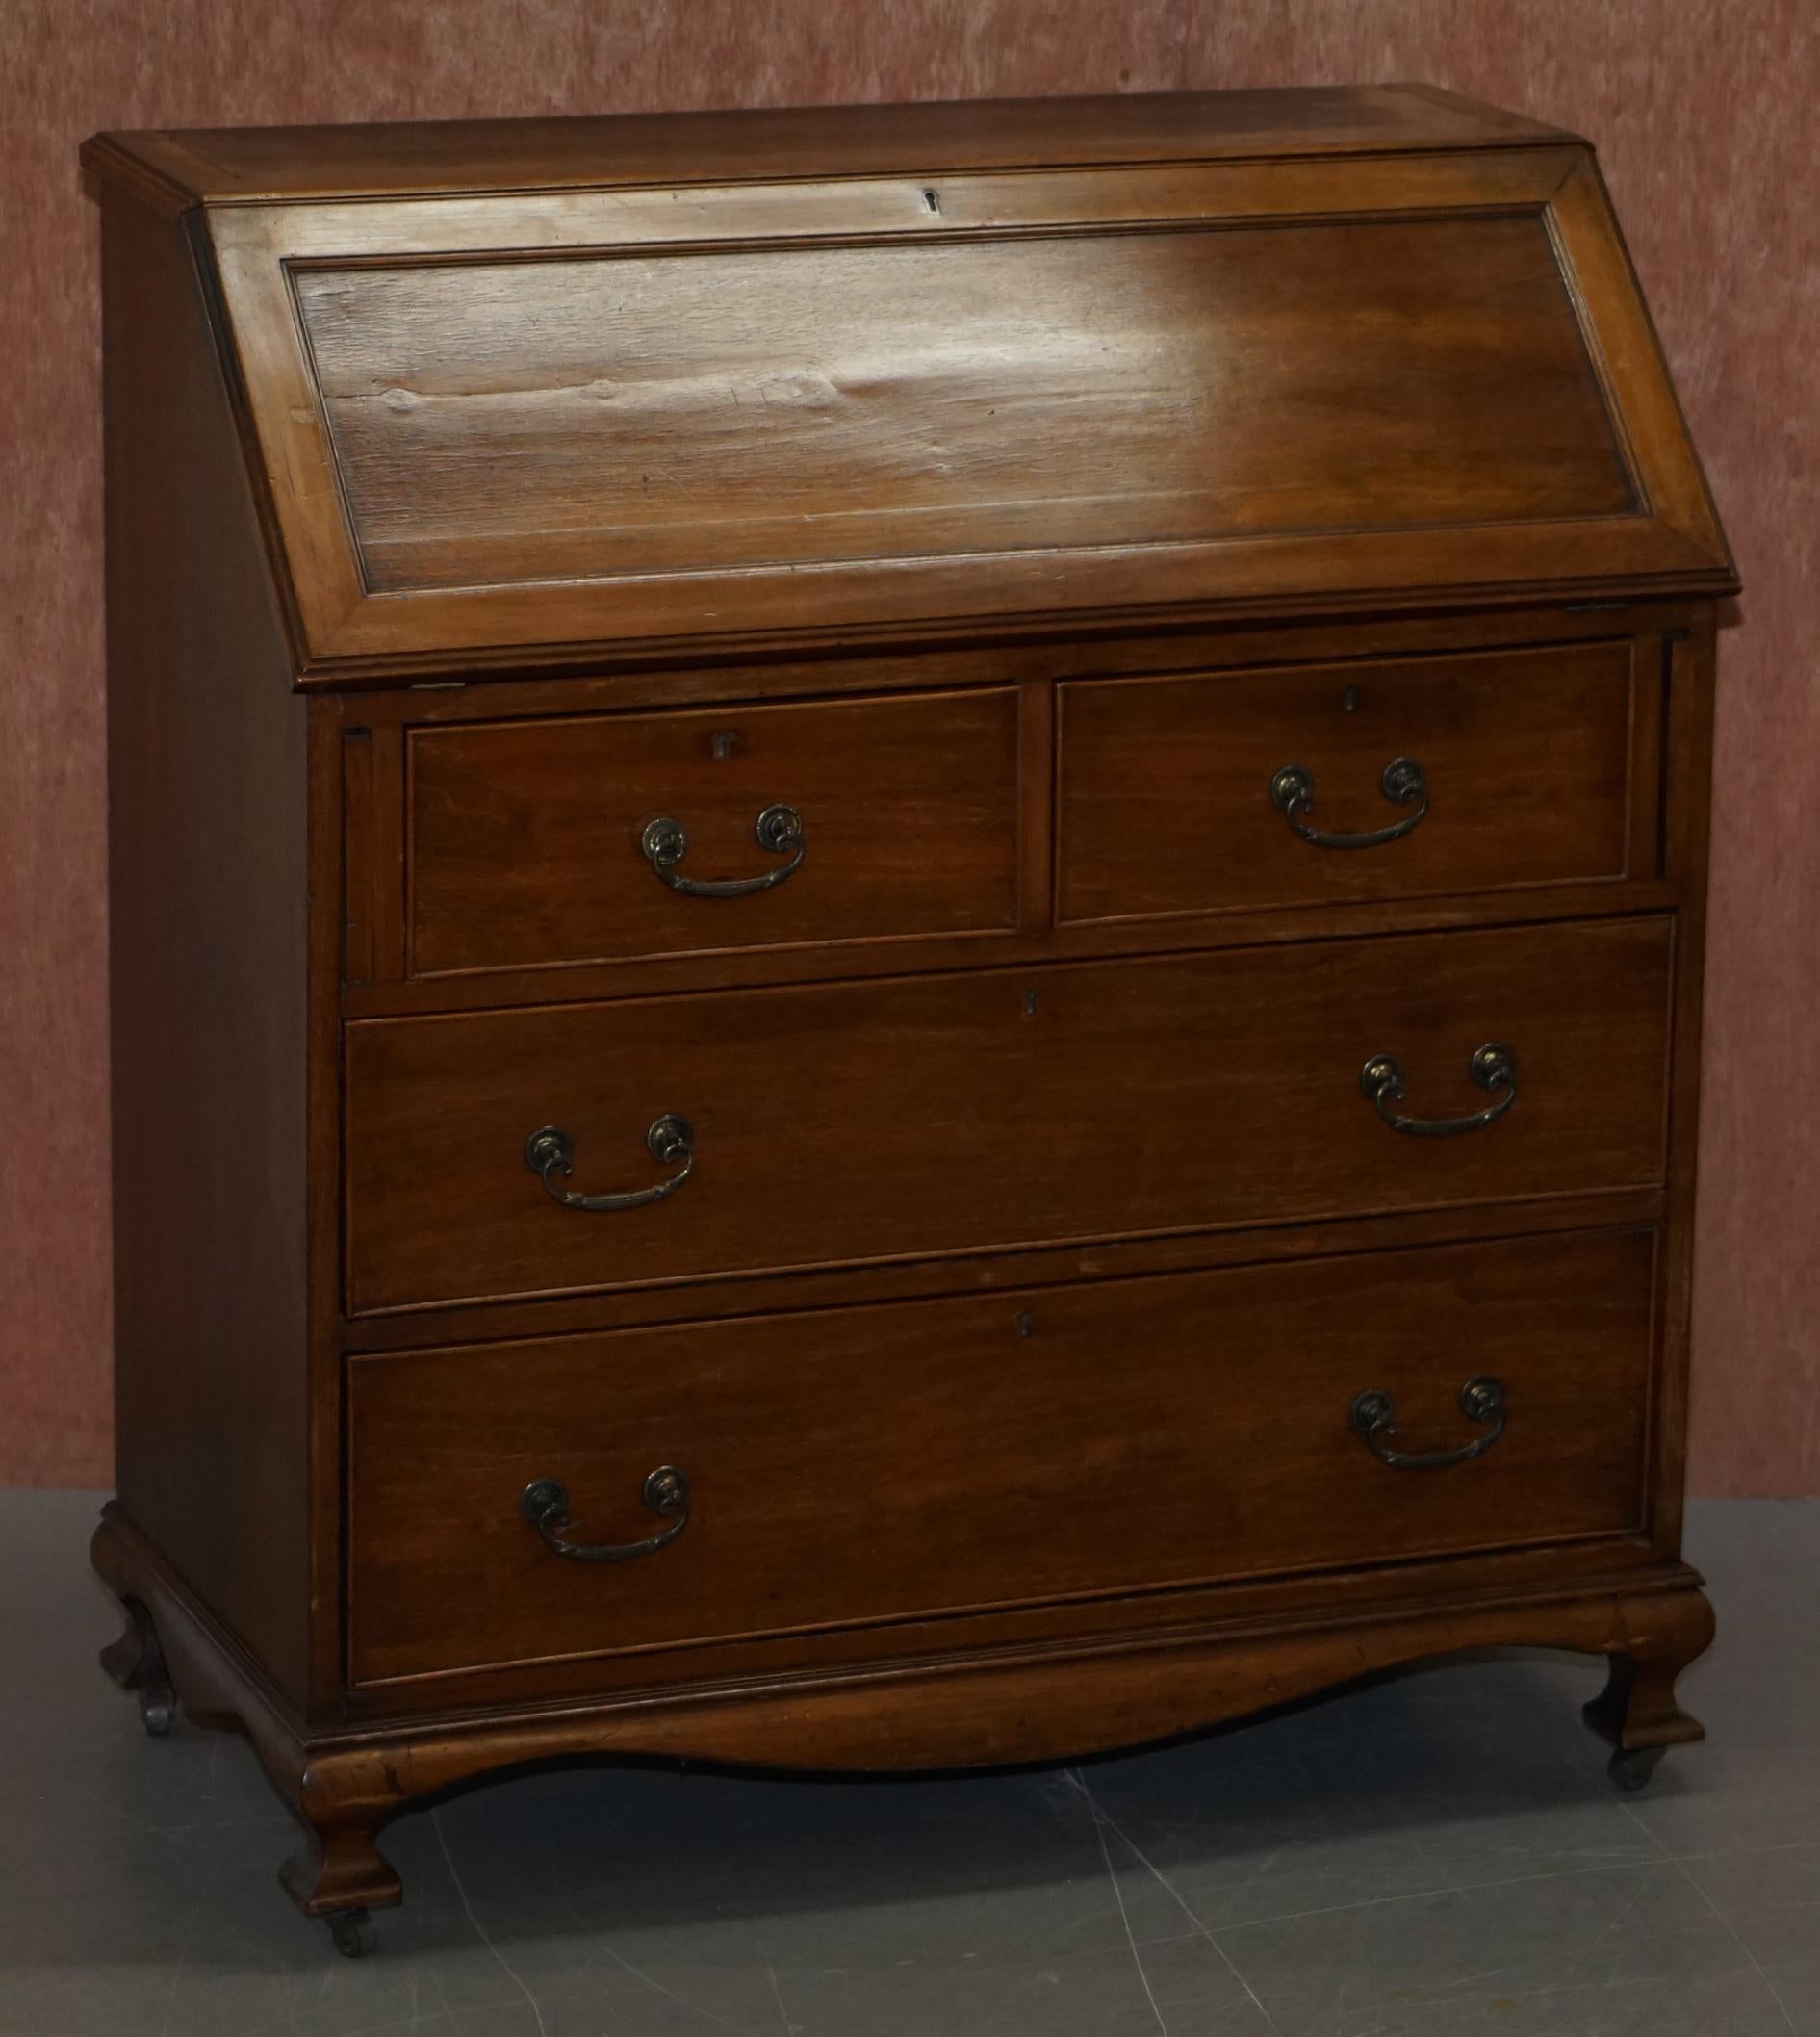 We are delighted to offer for sale this lovely late Victorian Walnut writing bureau with chest of drawers base

A good looking and versatile piece that sits on the original Victorian porcelain castors. This would have originally had a top that has